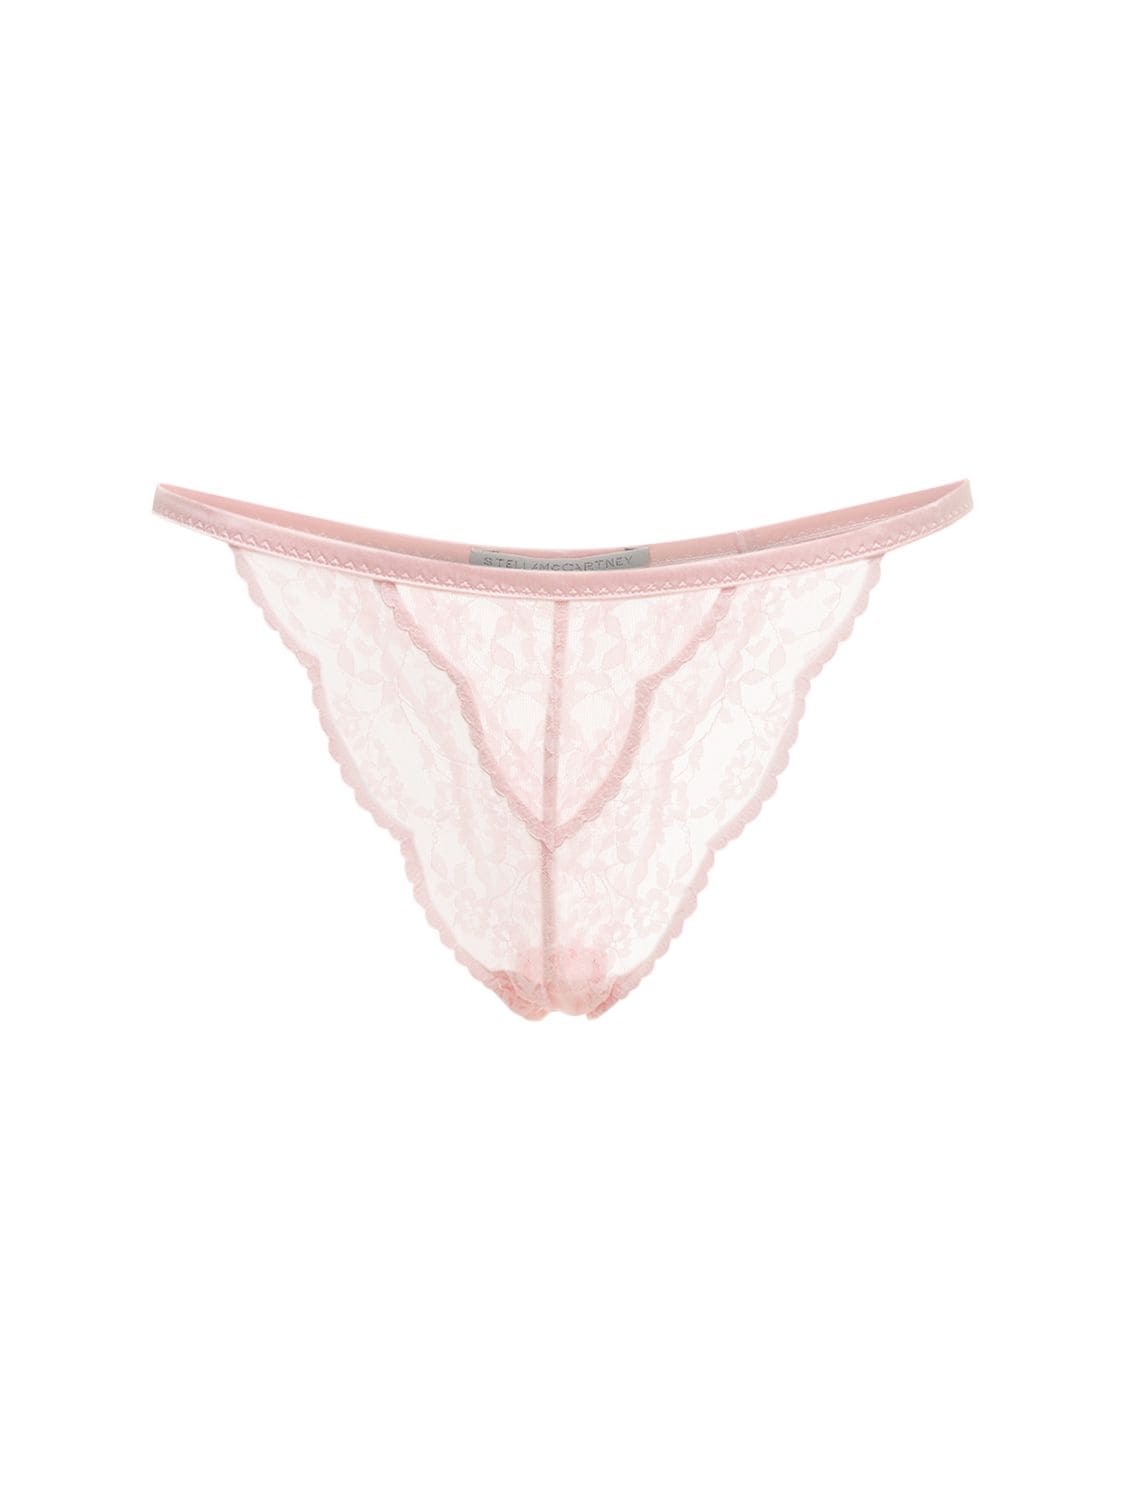 Stella McCartney Clementine Glancing Lace Low Rise Thong